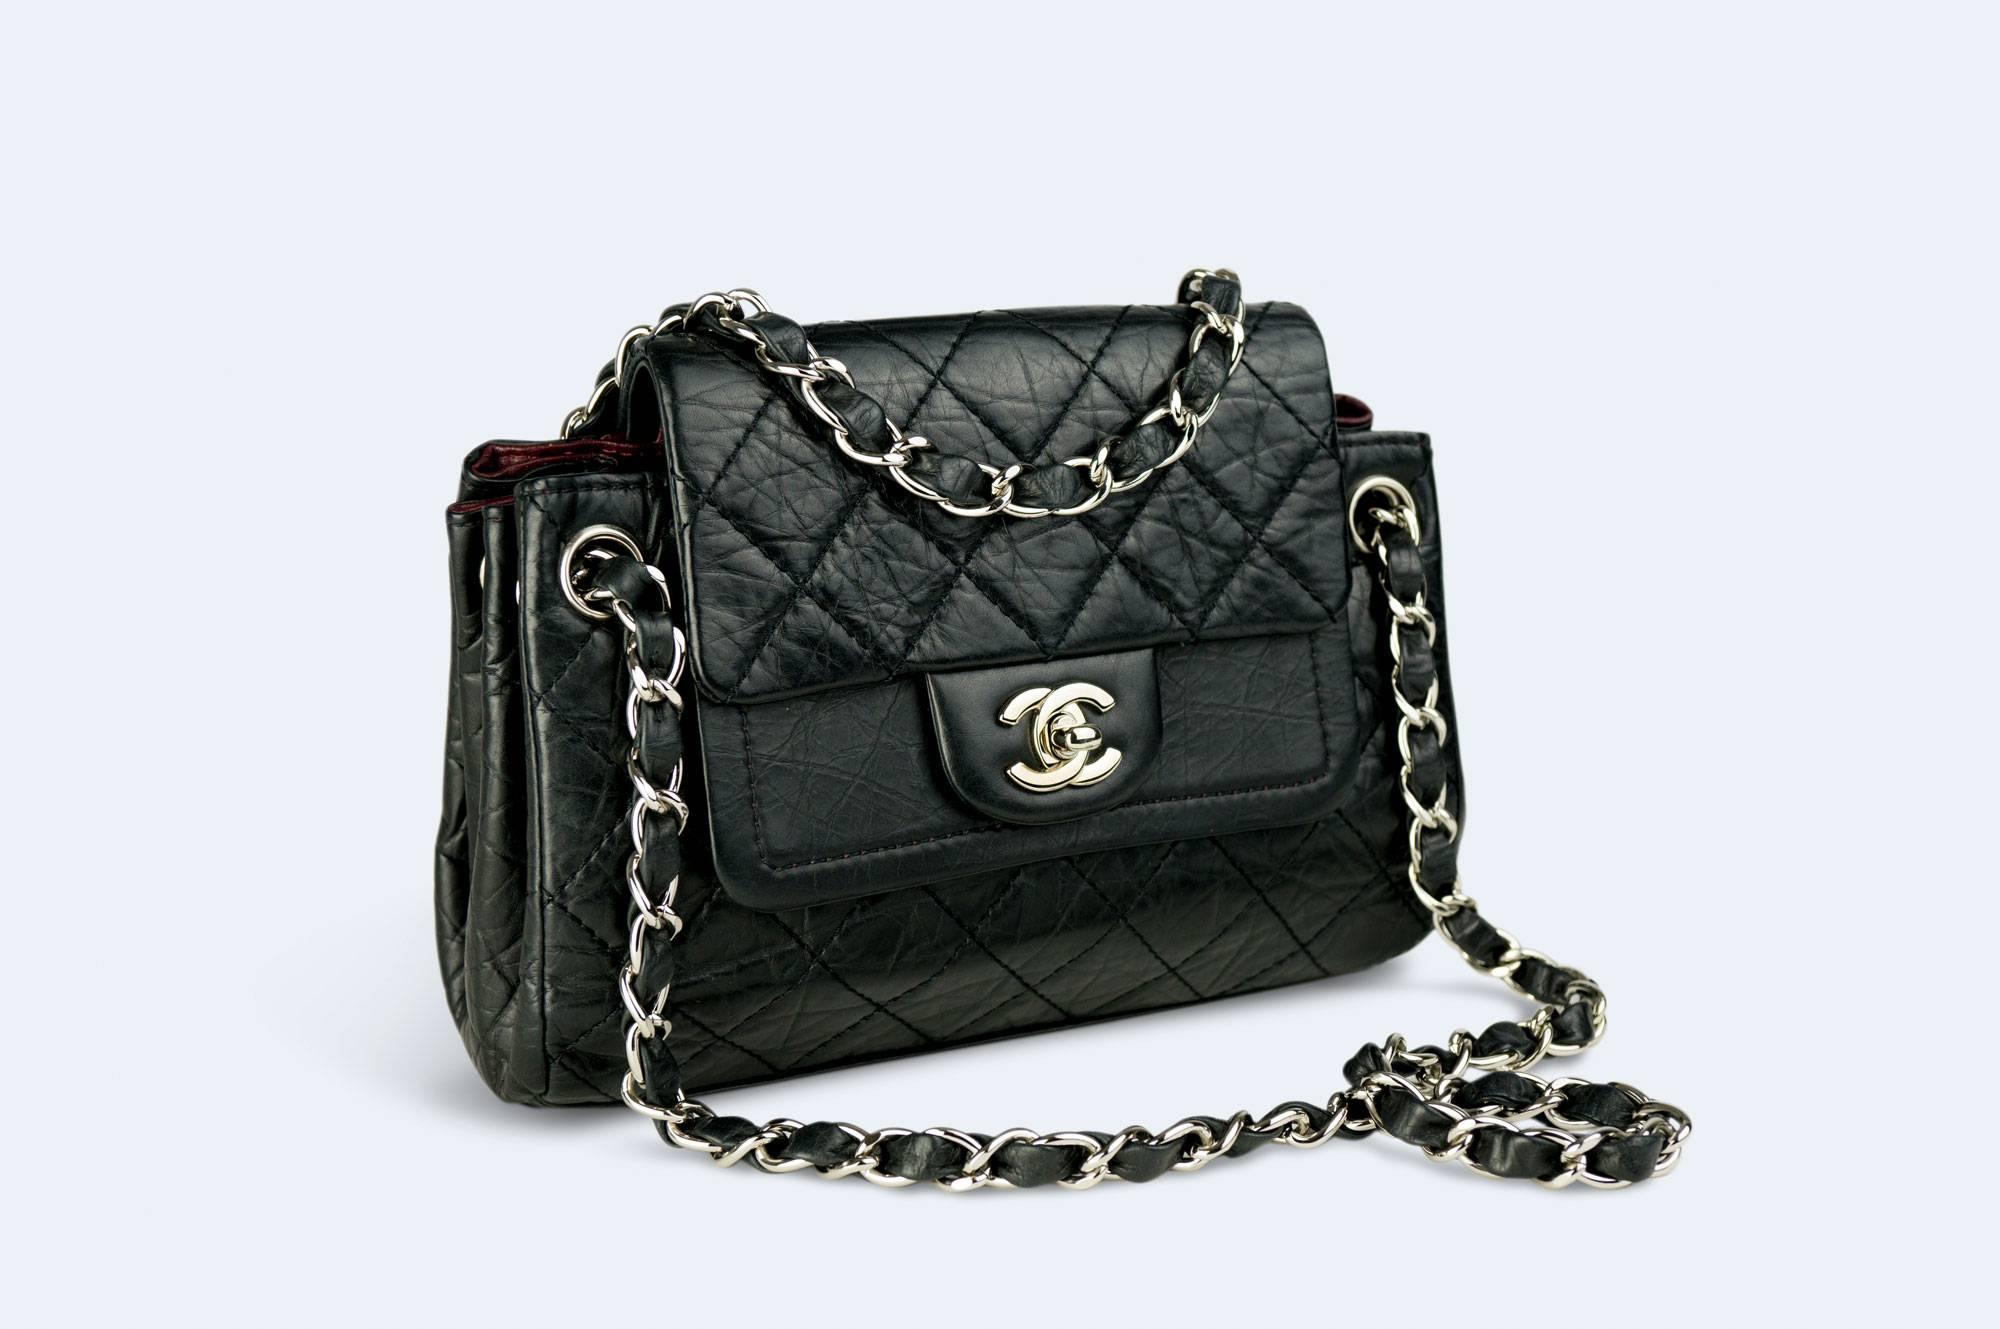 Chanel Calfskin Distressed Classic Limited Edition Double Flap Bag

2006 {VINTAGE 16 Years}
Distressed quilted calfskin leather
Double layer flap closure 
Silver hardware
Classic interowoven calfskin leather chain
CC turnlock
Burgundy lambskin